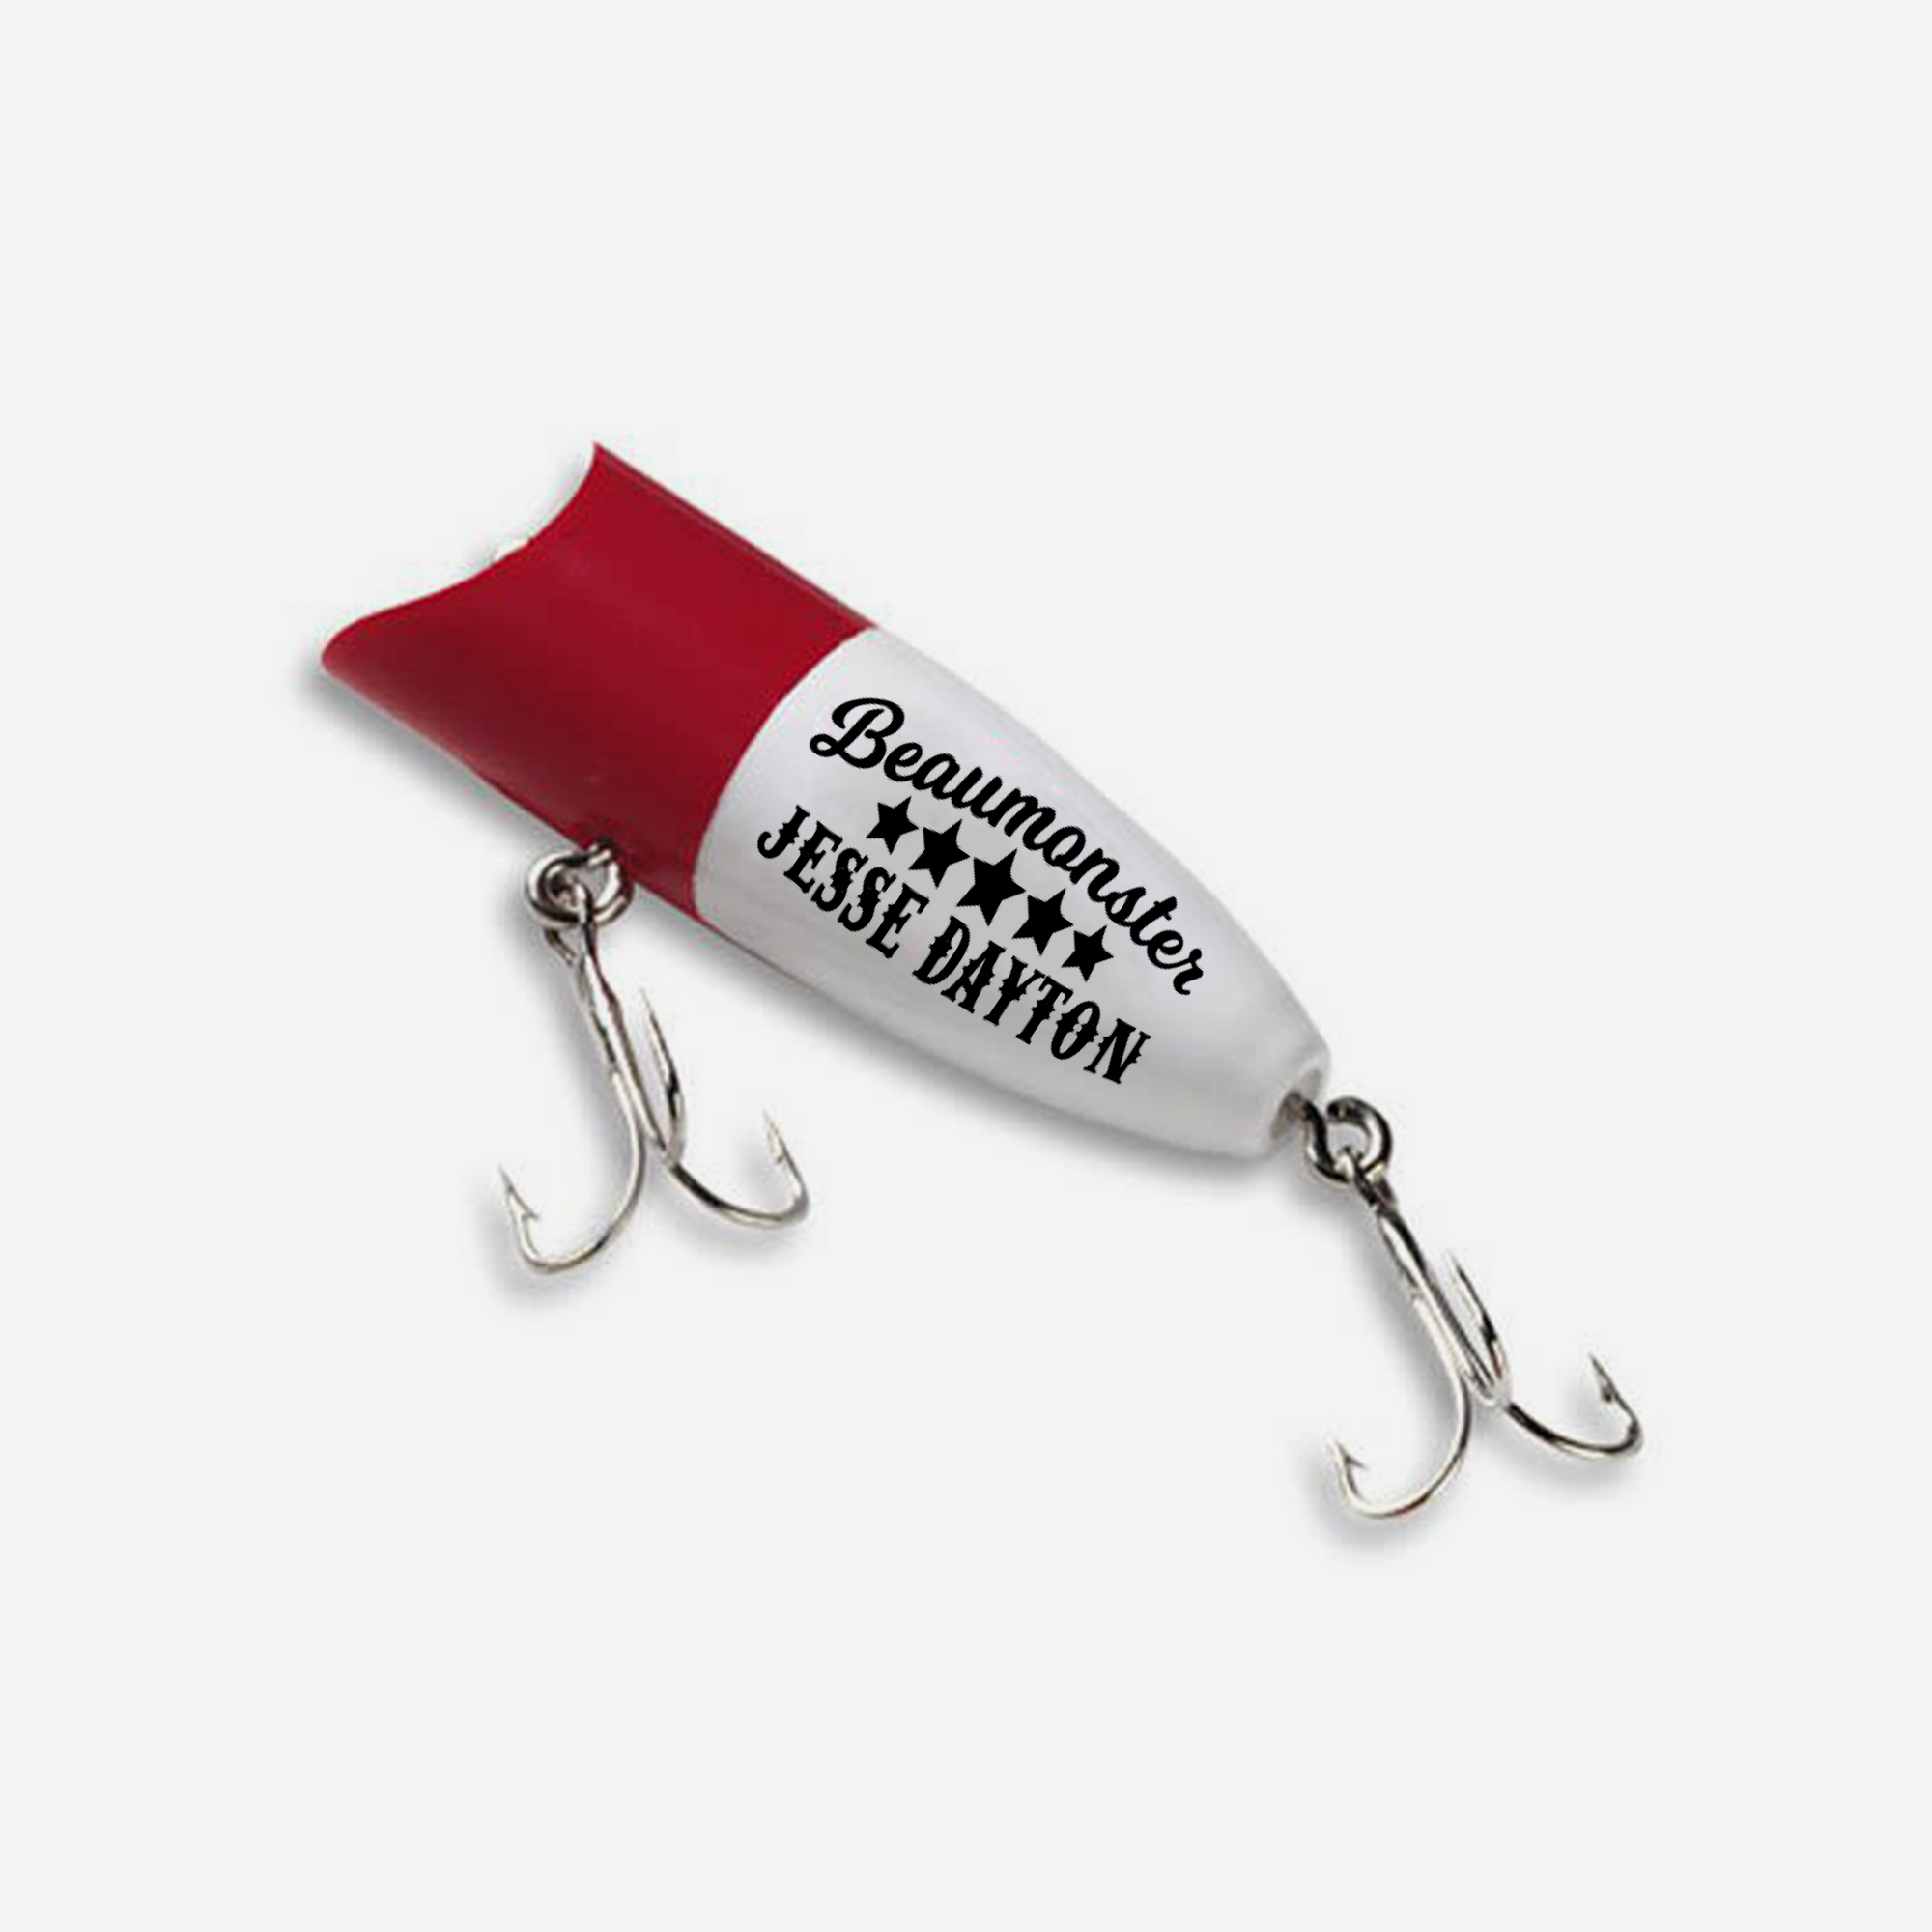 Gulf Coast Sessions - Limited Edition Beaumonster Fishing Lure